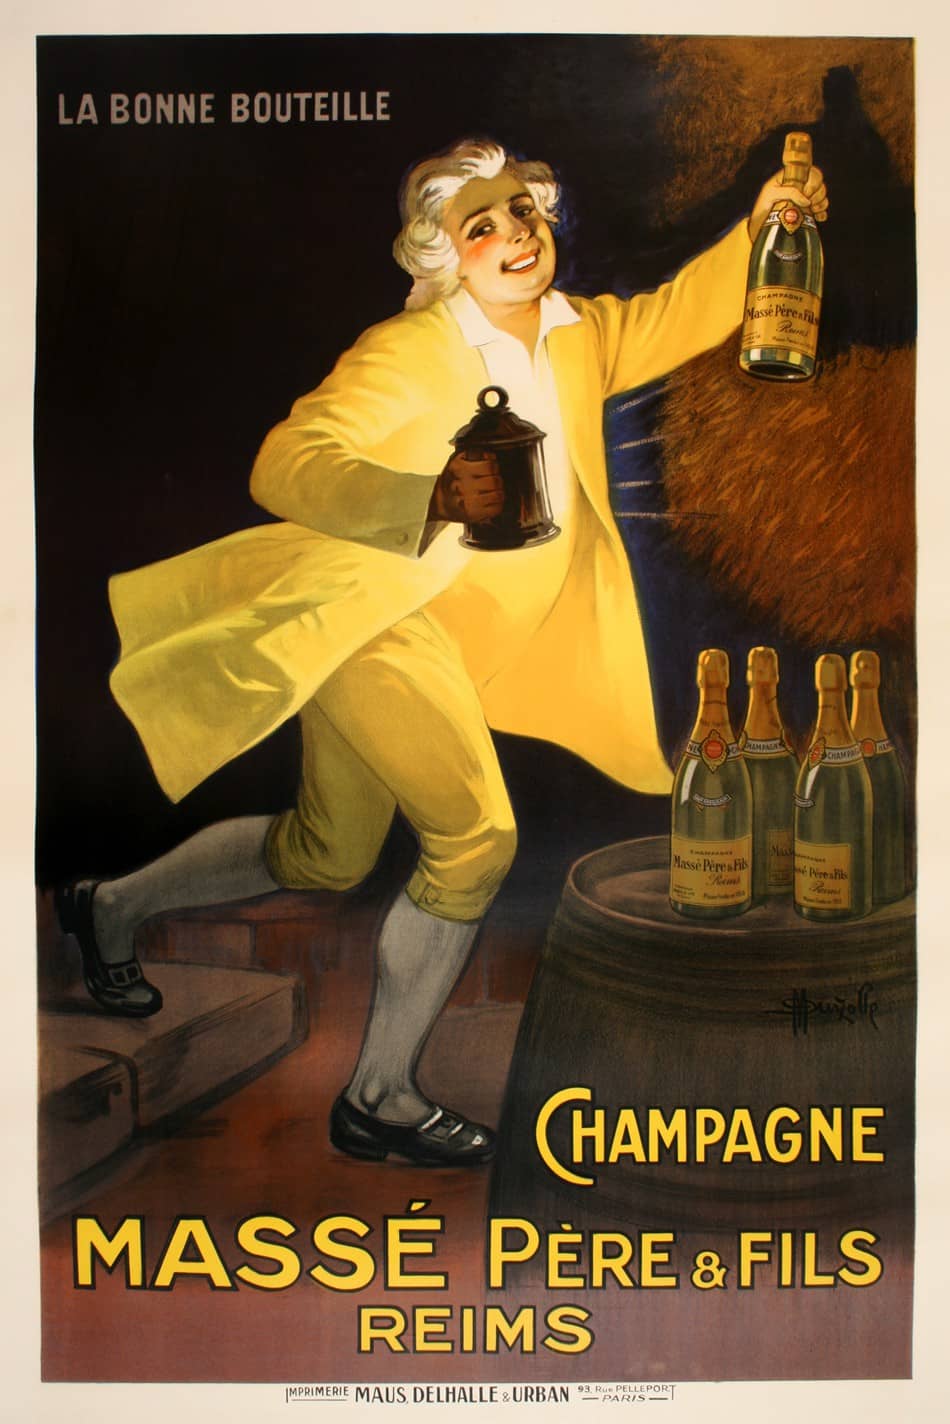 Champagne Masse' Original Vintage Poster c1910 by Auzolle